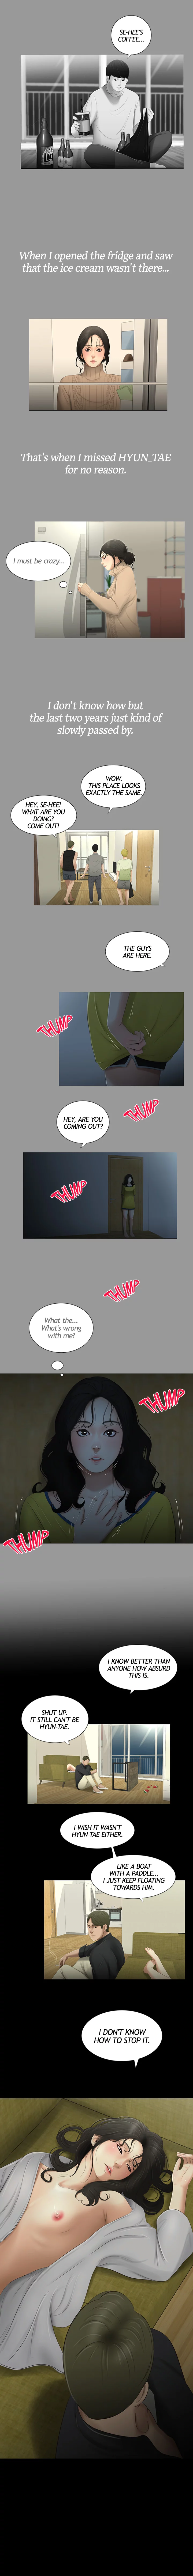 Friends With Secrets - Chapter 4 Page 3